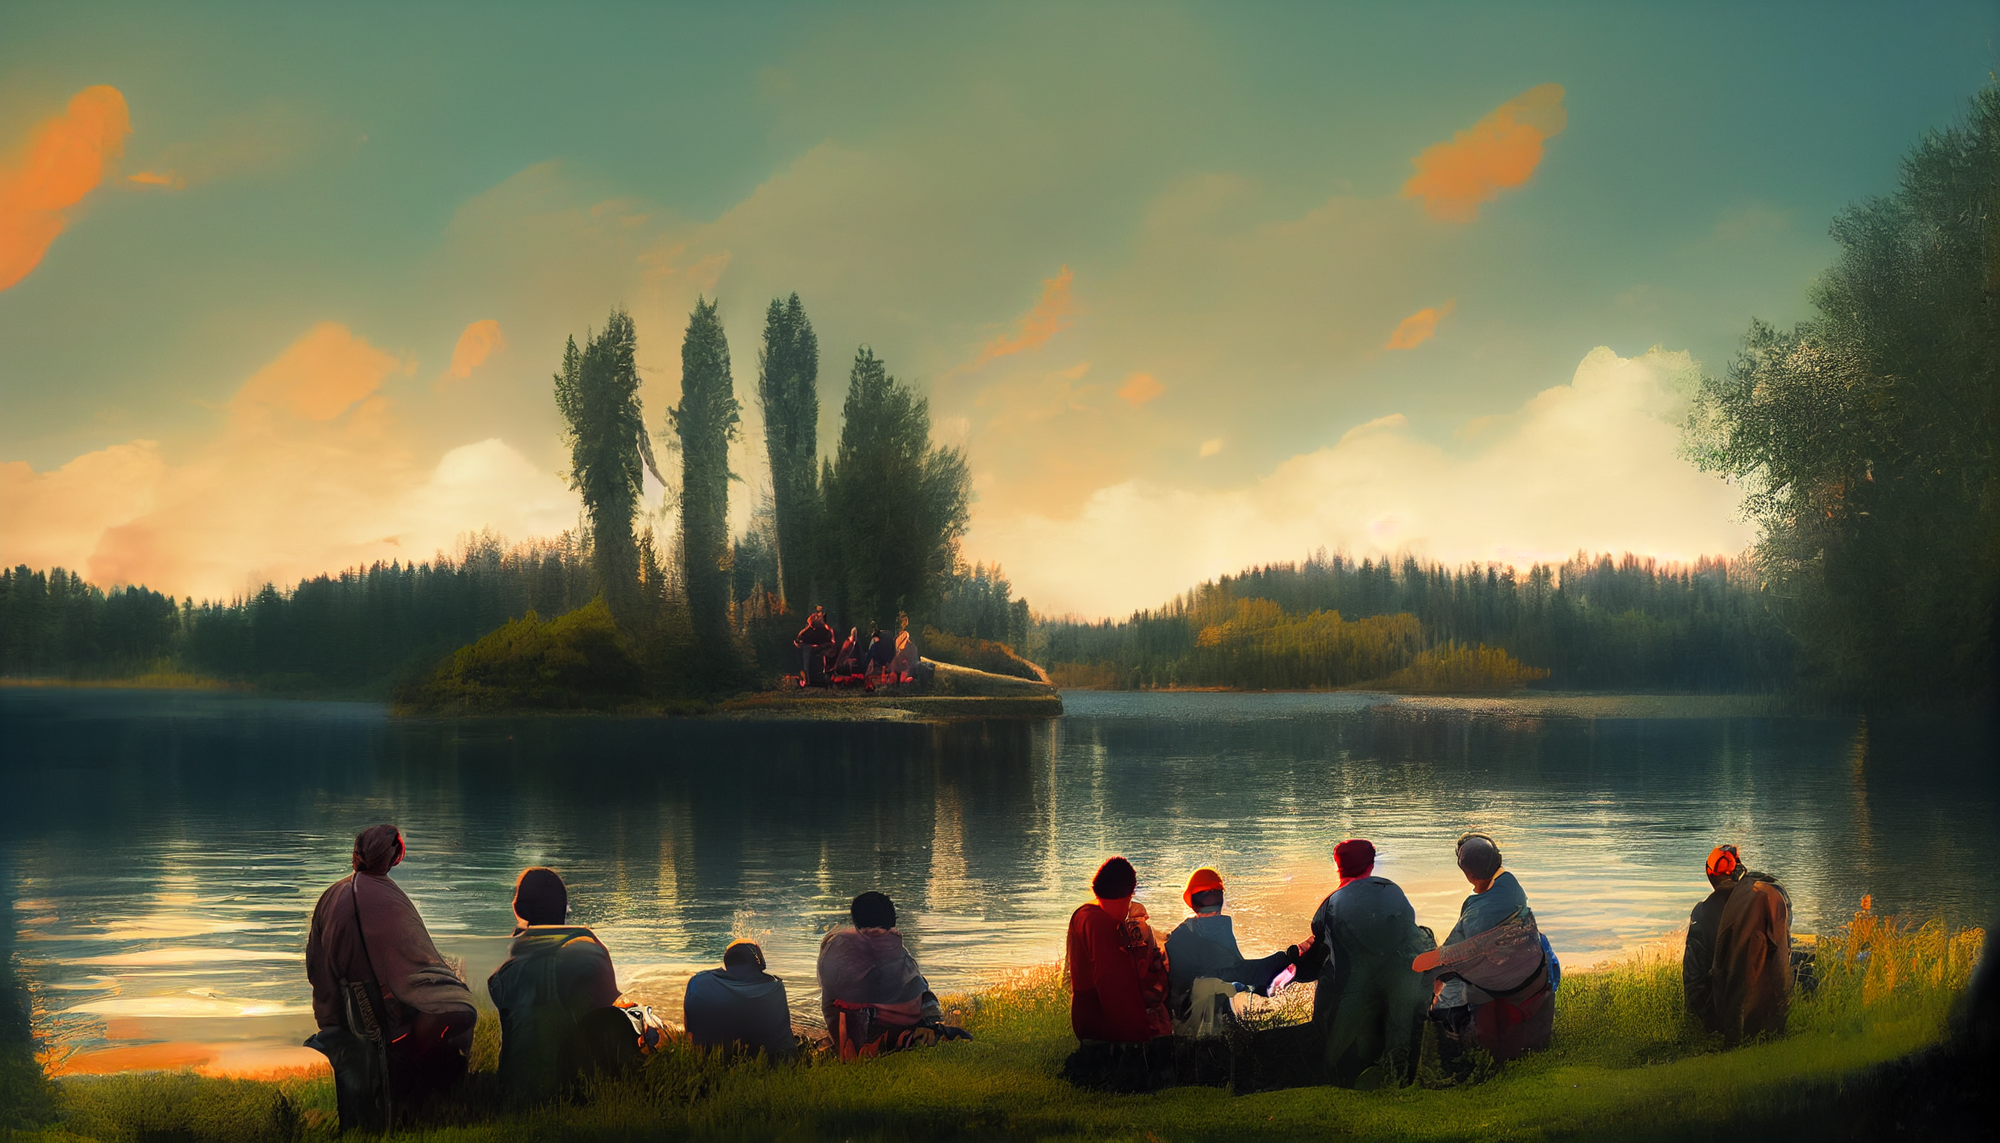 A group of people gathered by the lake with trees in the background.